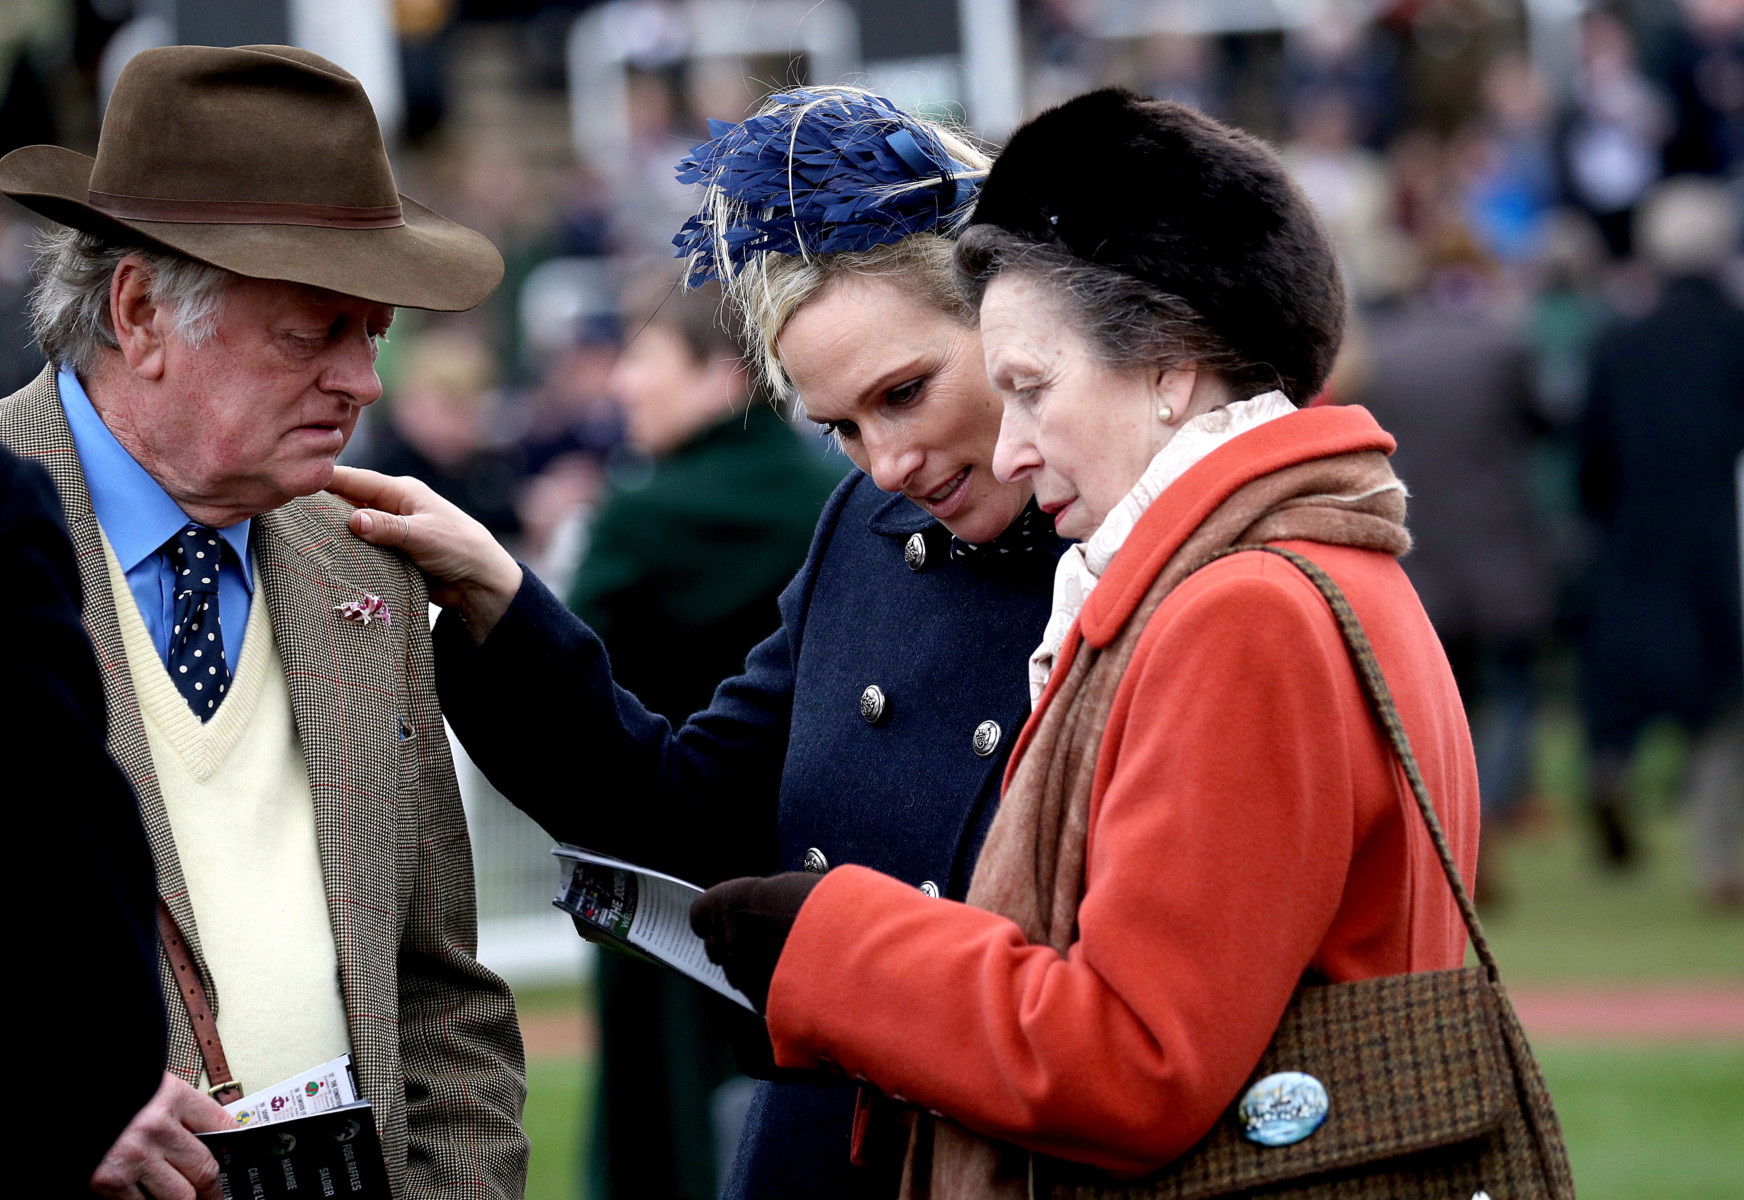  Andrew Parker Bowles believe he caught coronavirus at the Cheltenham Festival, where he was pictured with Zara Tindall and Princess Anne